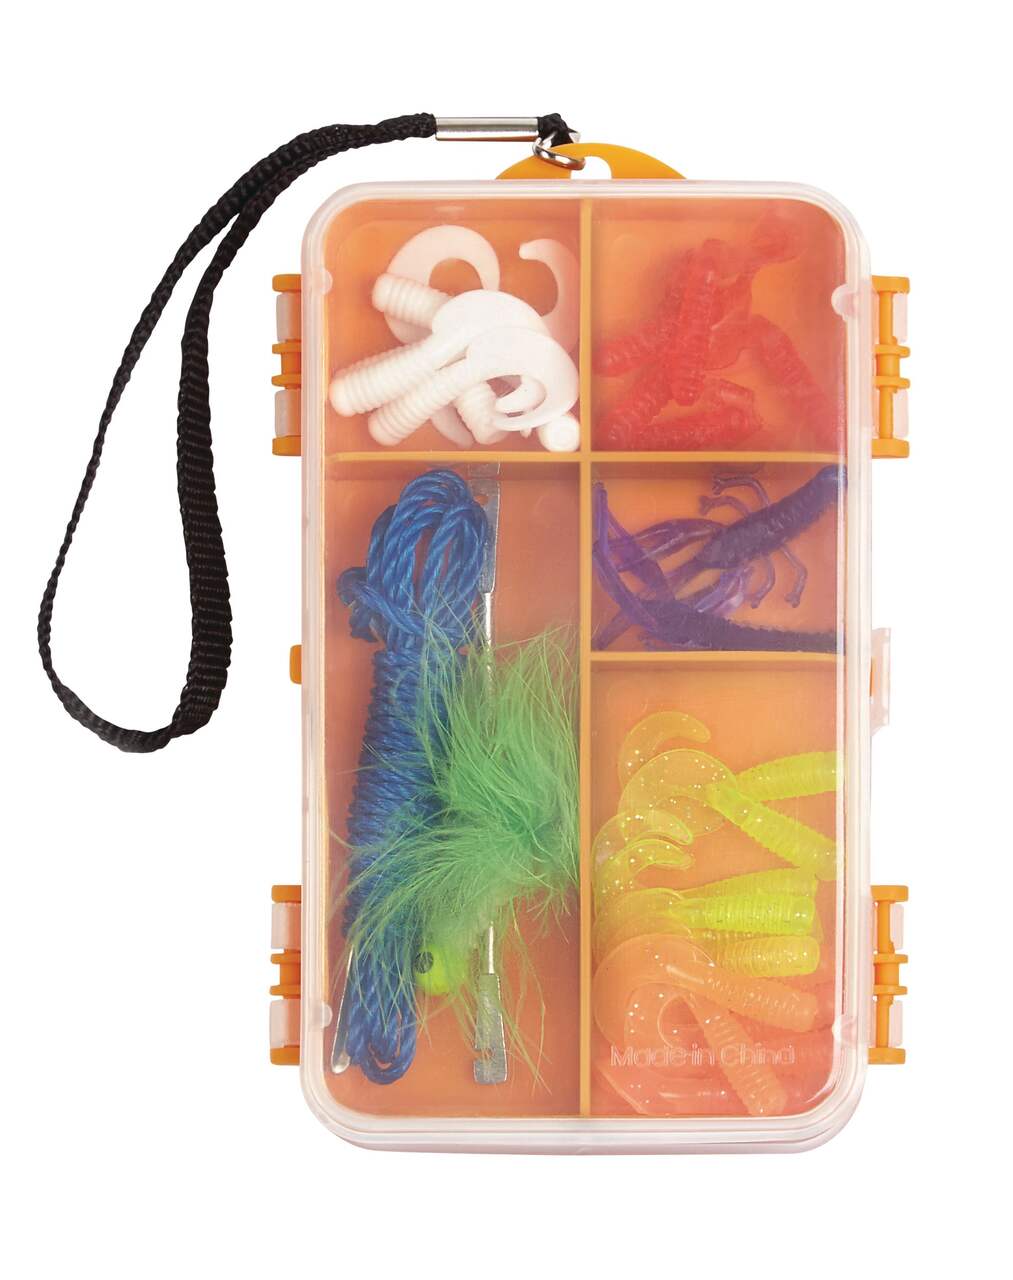 Lipstore Fishing Fishing Rod Fishing Box Complete Fishing Set Other As Described